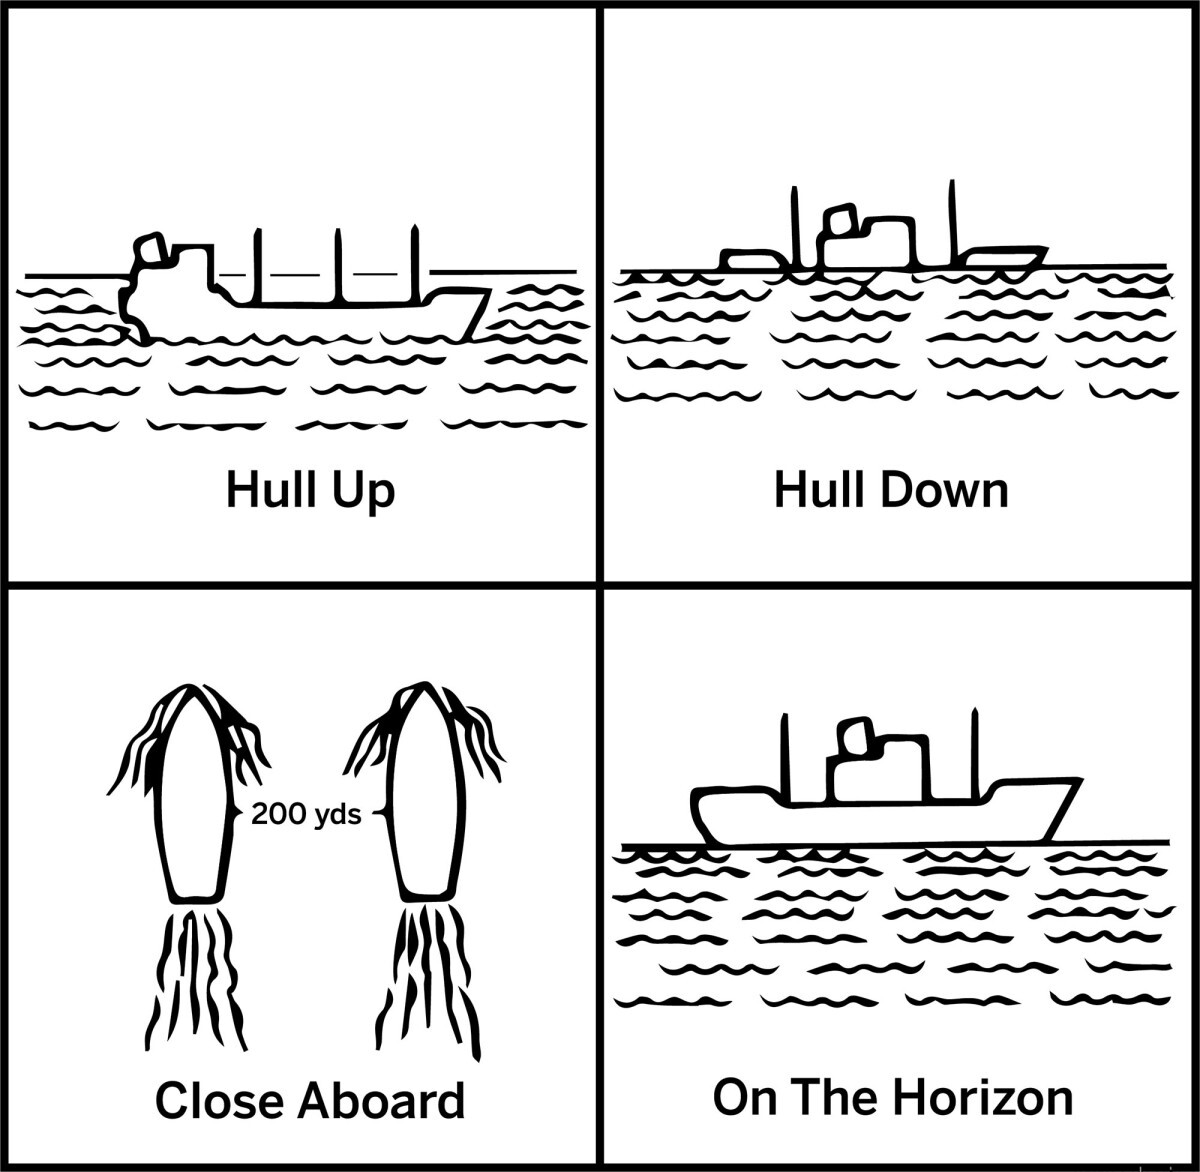 when is a lookout on a vessel required